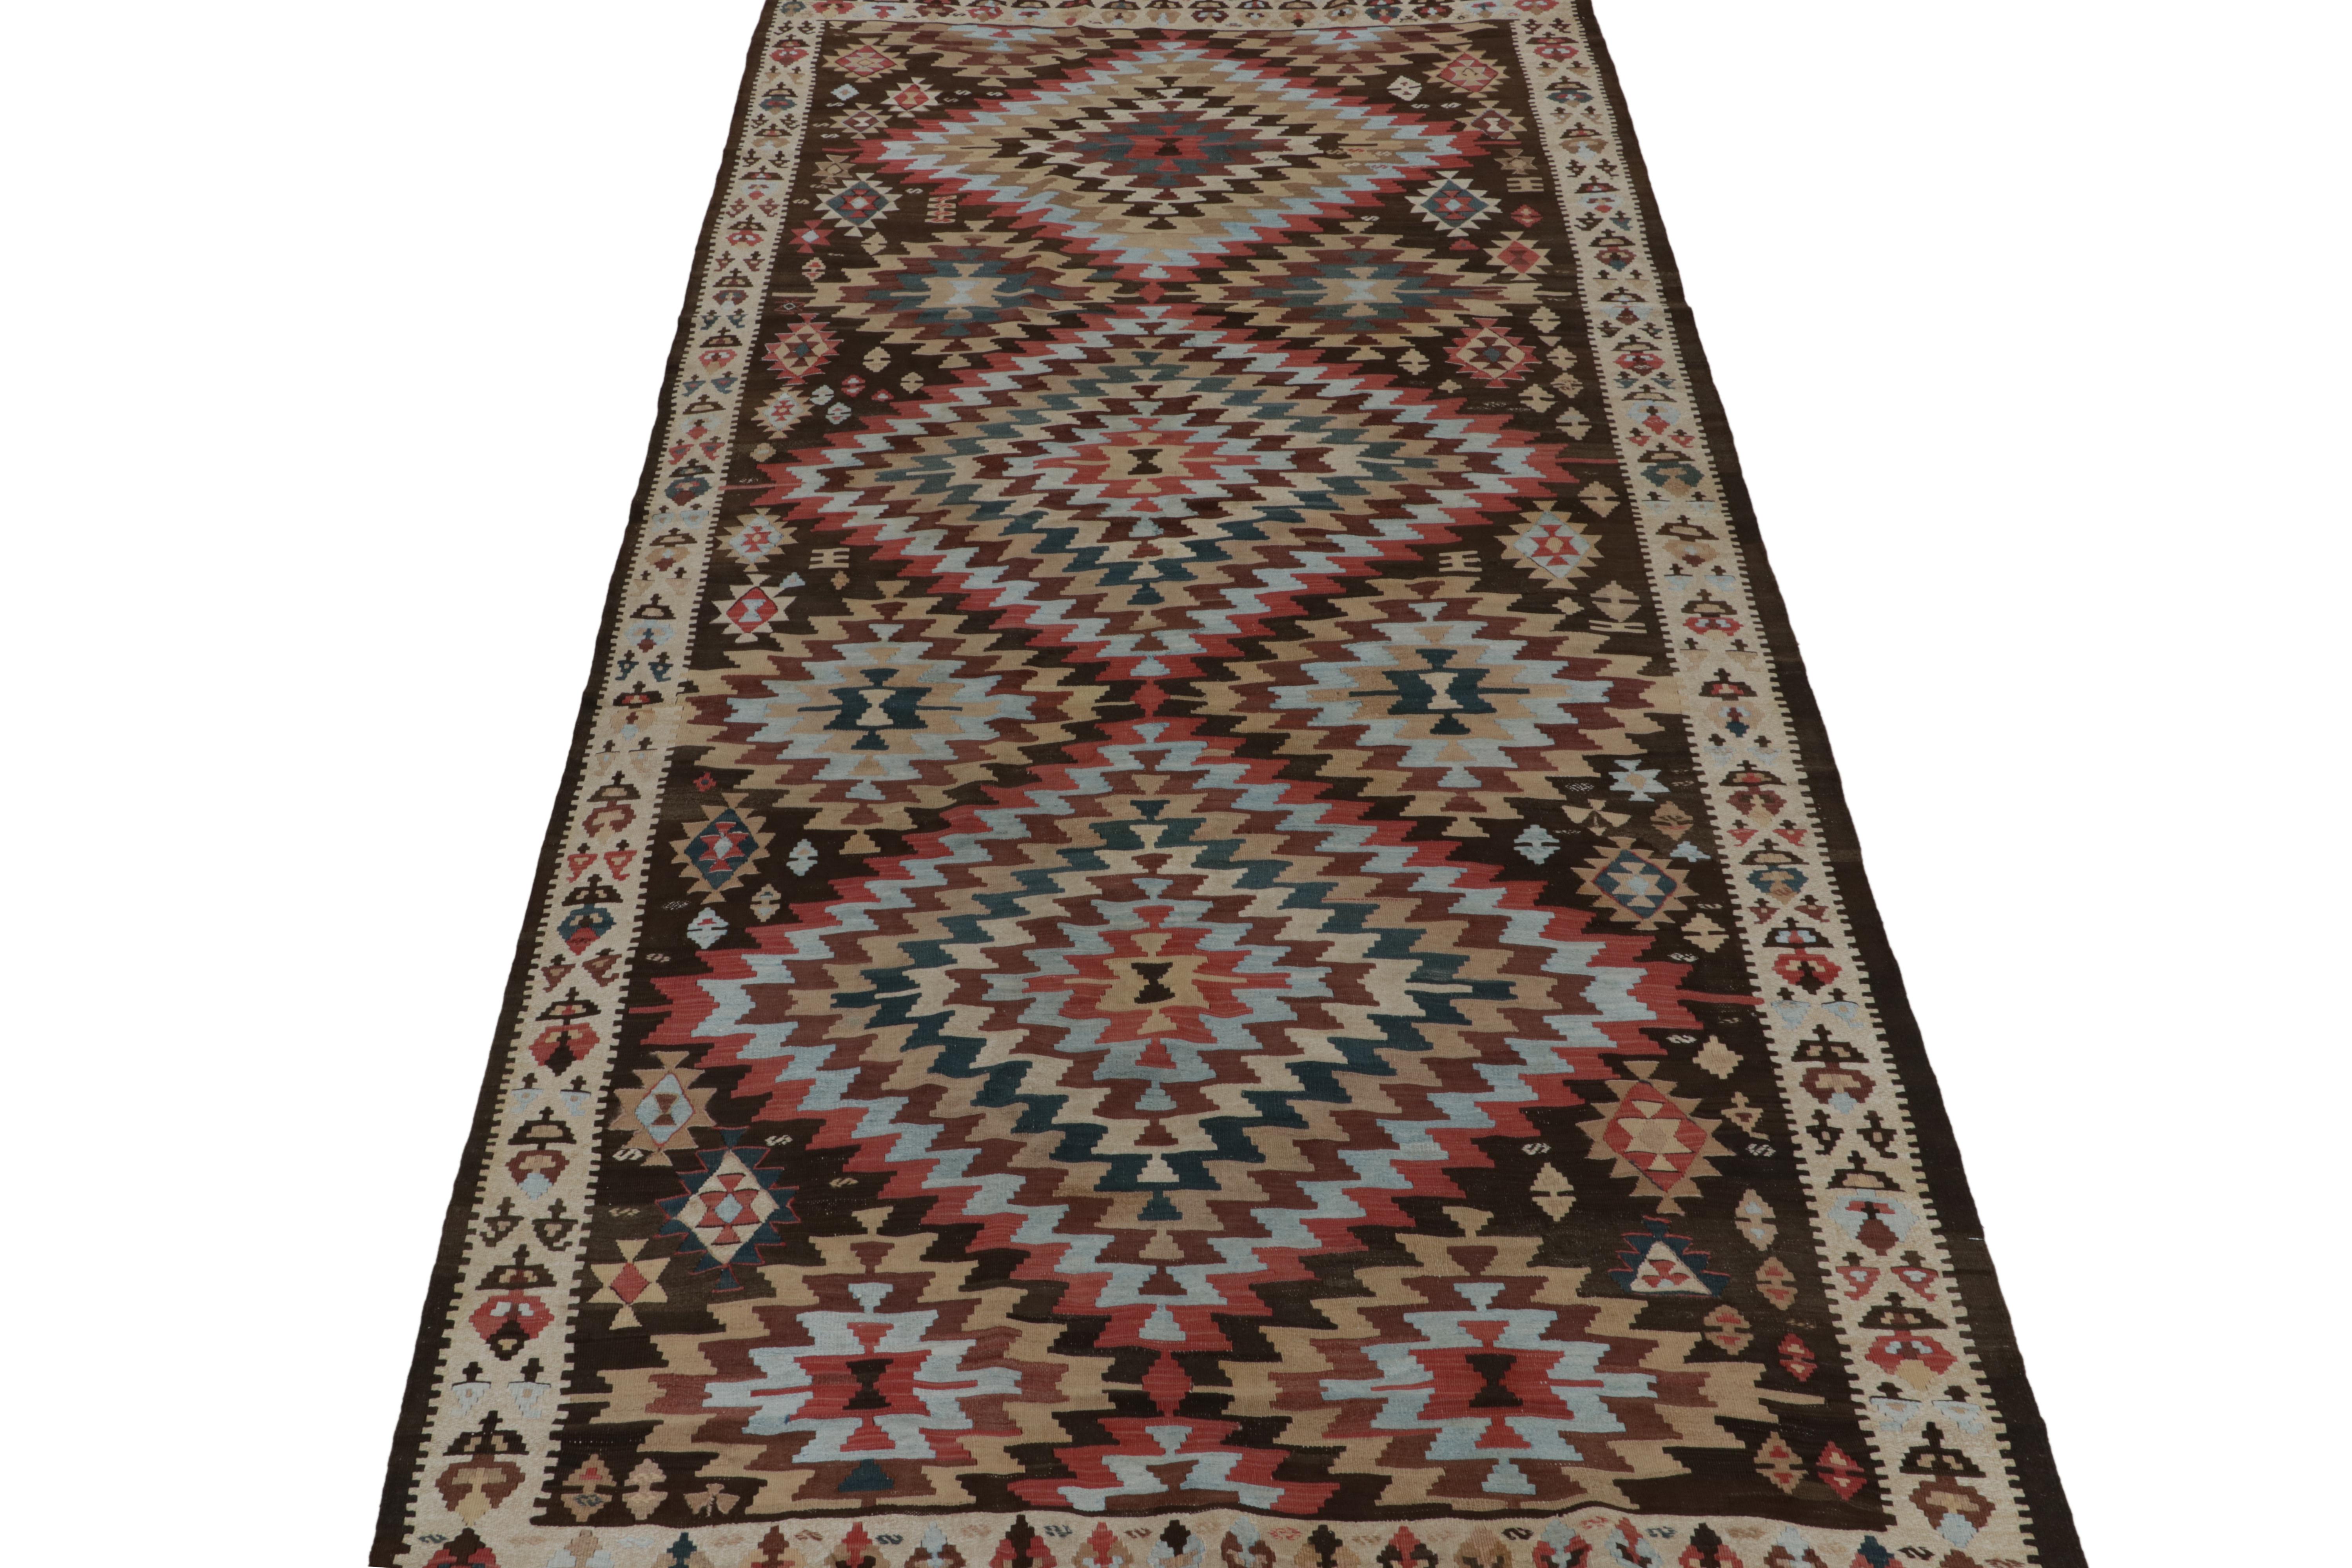 This vintage 6x11 Persian kilim is a meticulously detailed tribal rug—handwoven in wool circa 1950-1960.

Further on the Design:

This polychromatic medallion design prefers chocolate brown, beige, brick red and sky blue in its graphic play of rich